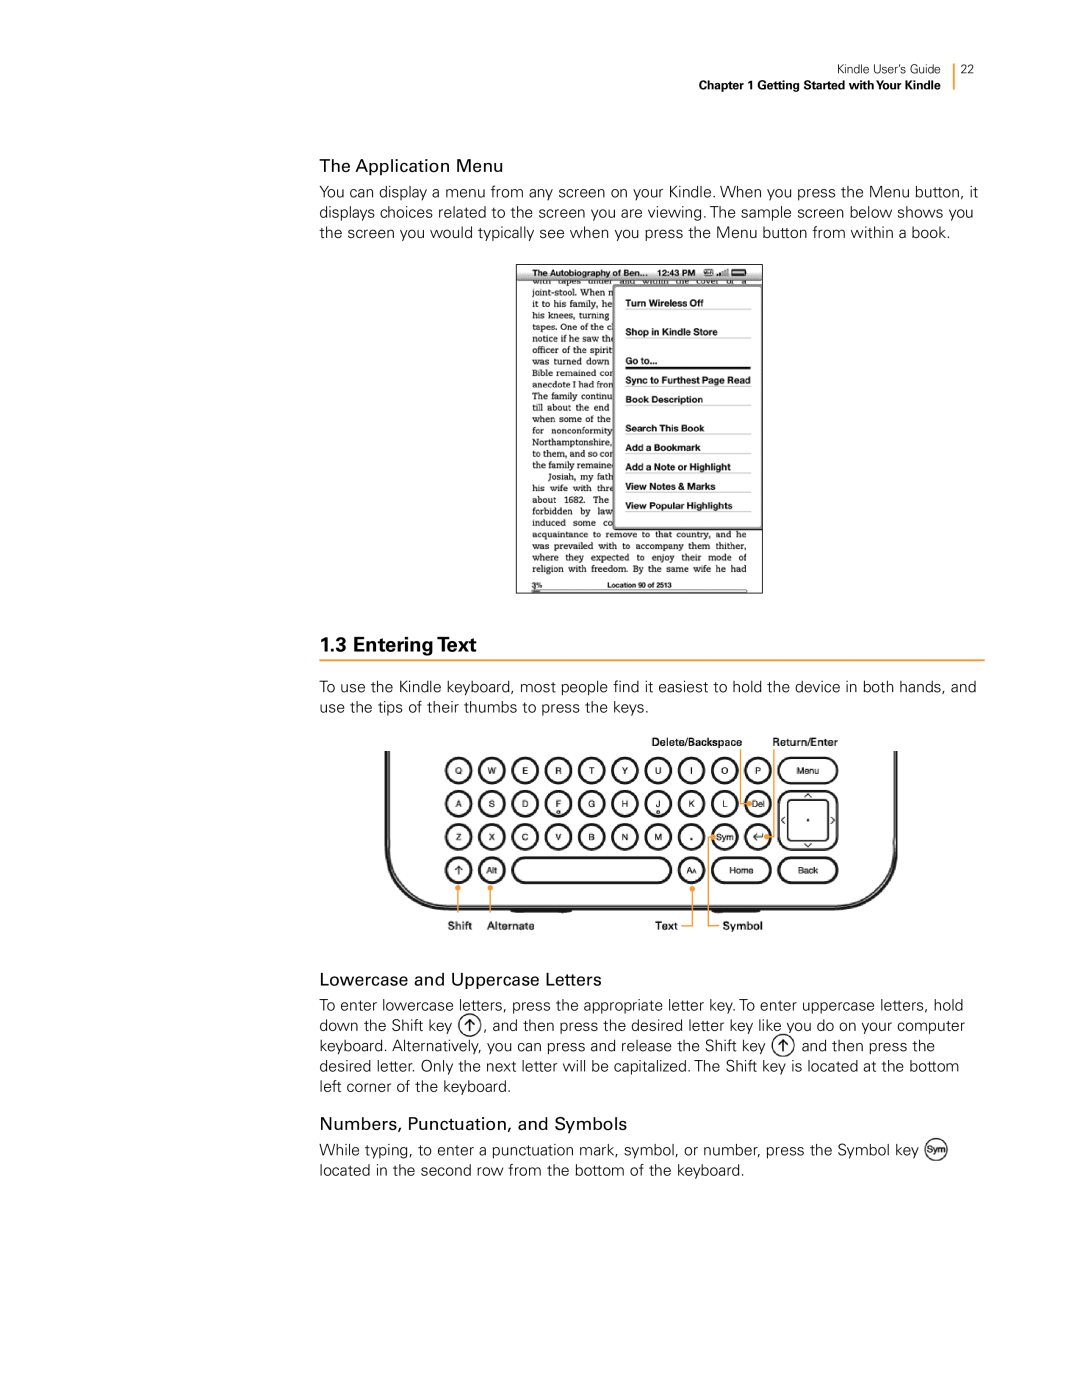 Amazon KNDKYBRD3G Entering Text, The Application Menu, Lowercase and Uppercase Letters, Numbers, Punctuation, and Symbols 